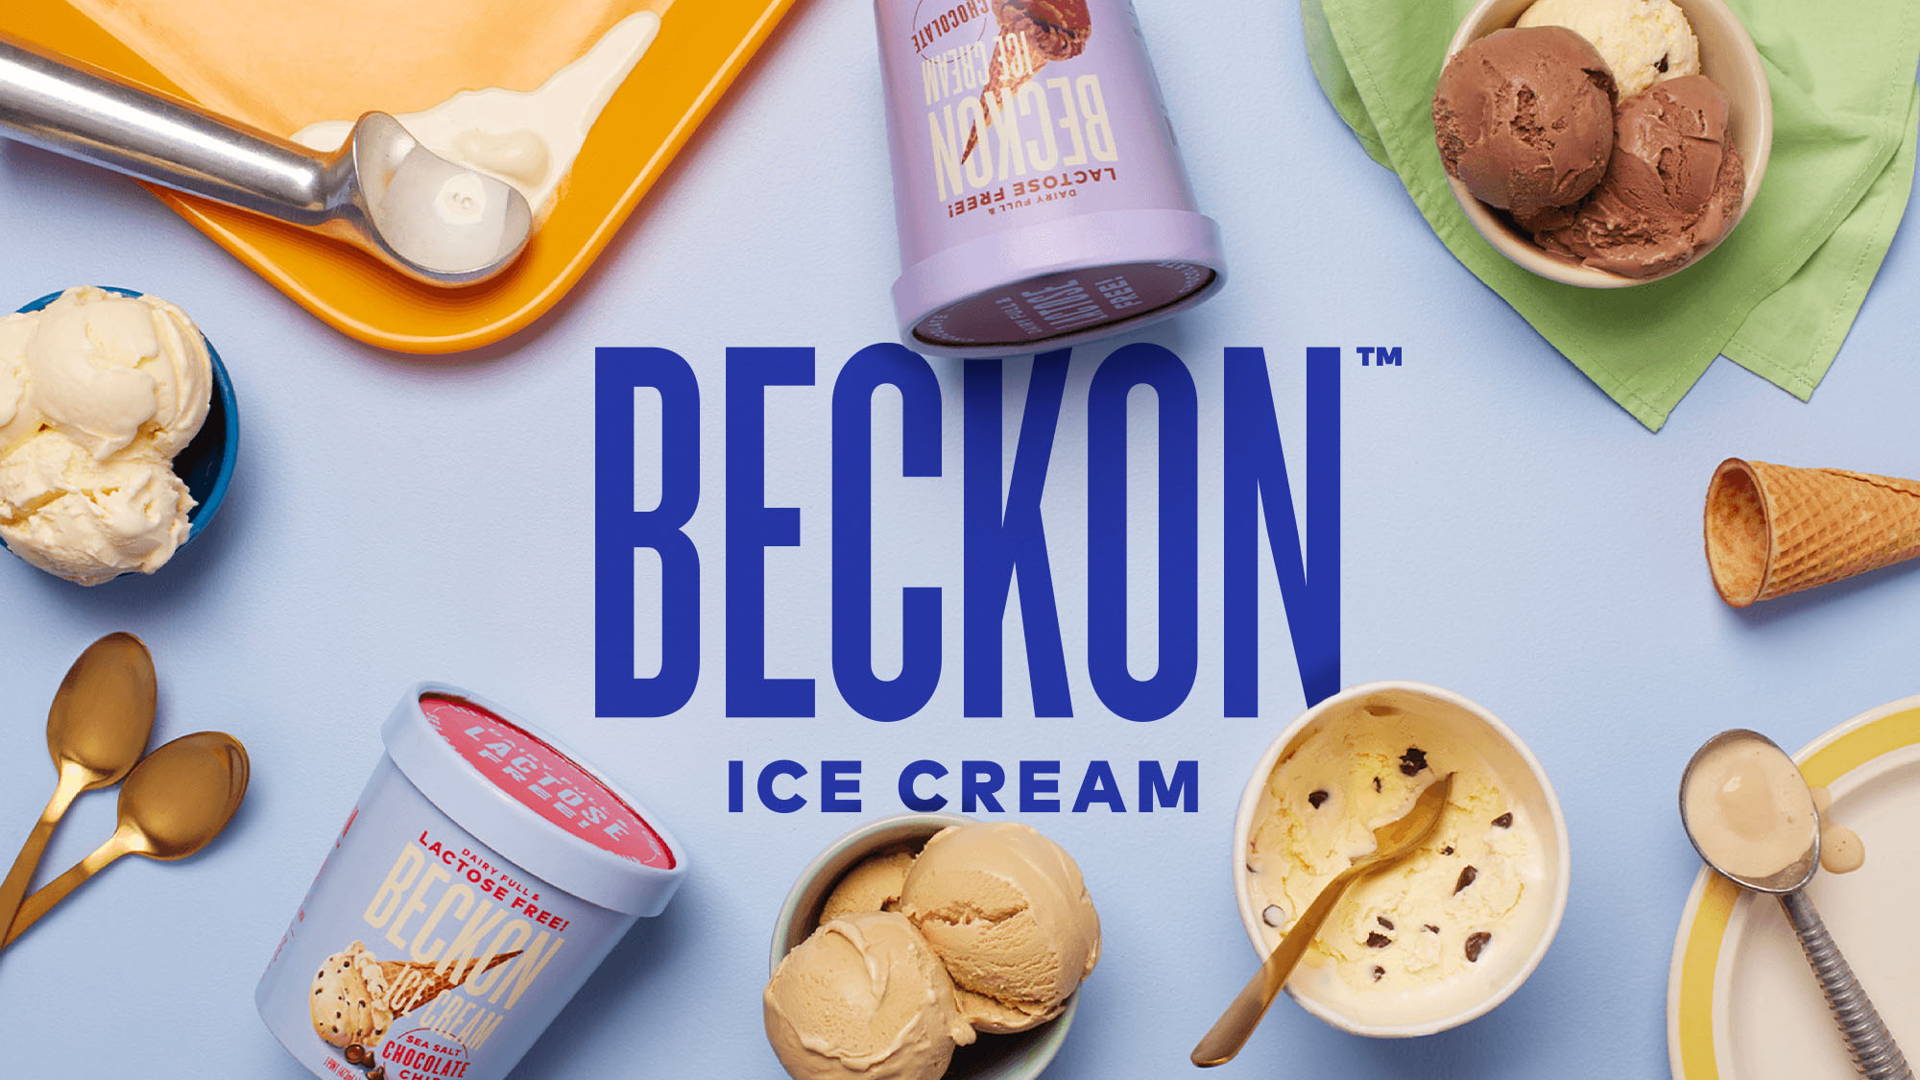 Featured image for Beckon Ice Cream Redesign Proves Lactose-Free Can Be For All